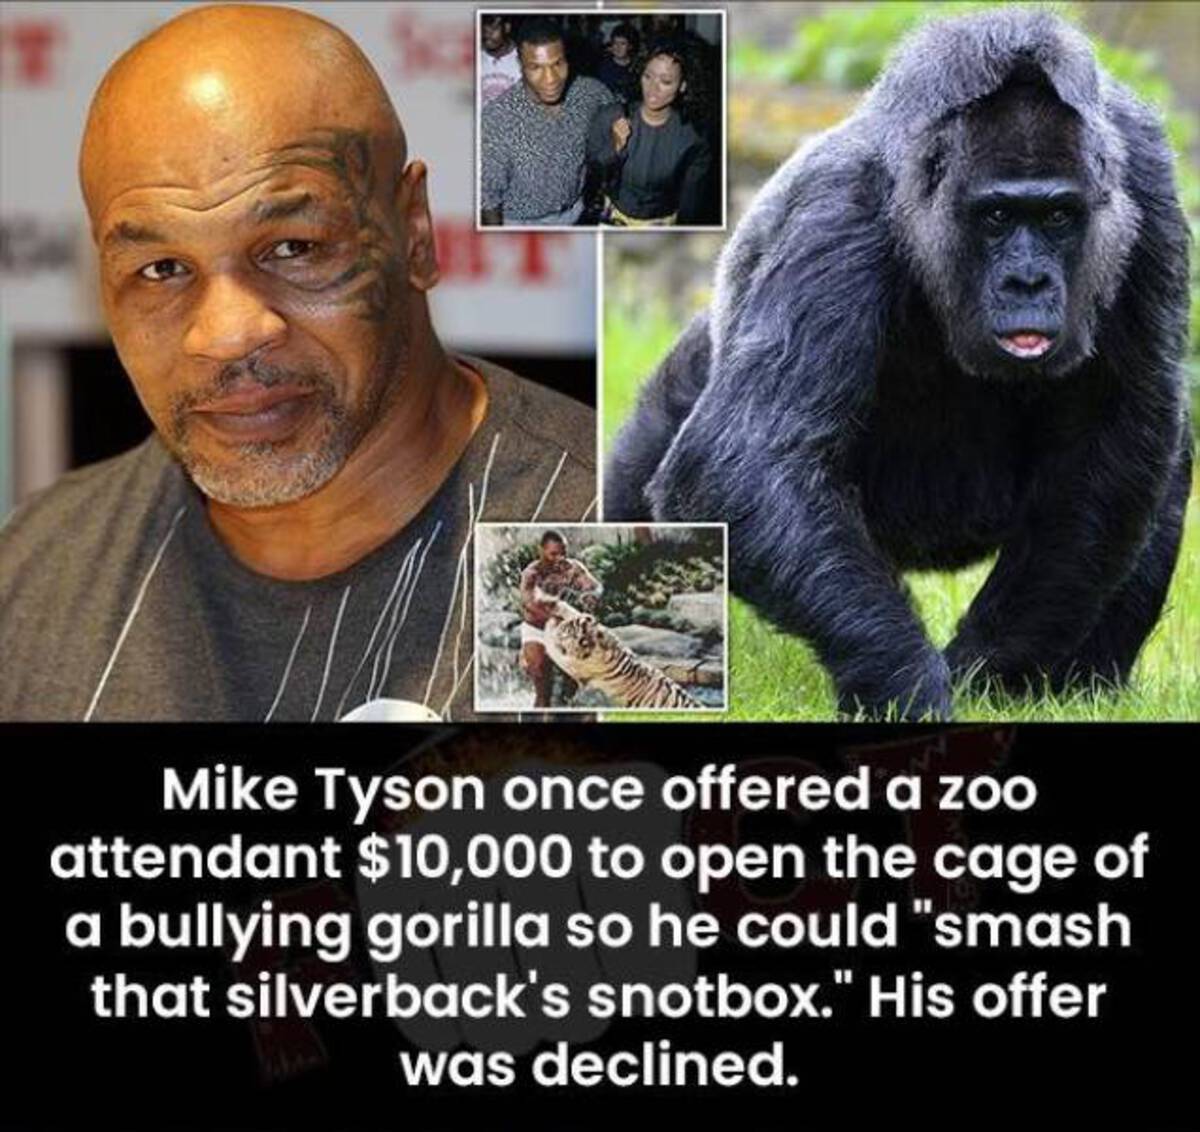 mike tyson congolese - T Mike Tyson once offered a zoo attendant $10,000 to open the cage of a bullying gorilla so he could "smash that silverback's snotbox." His offer was declined.